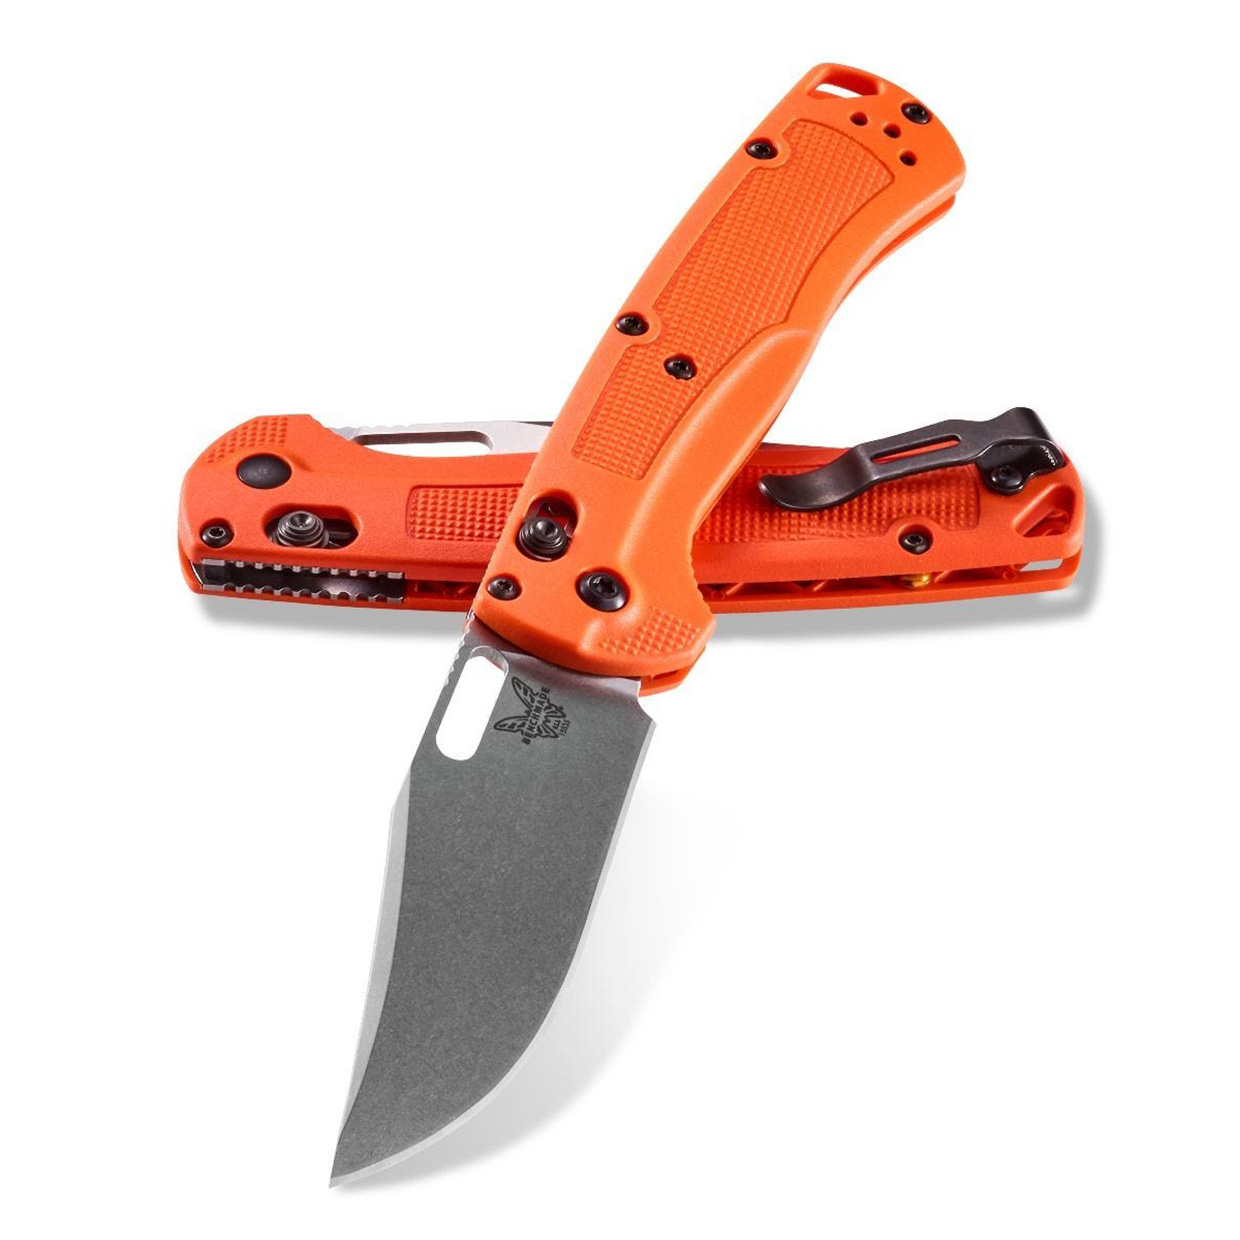 Benchmade 15535 Taggedout Knife